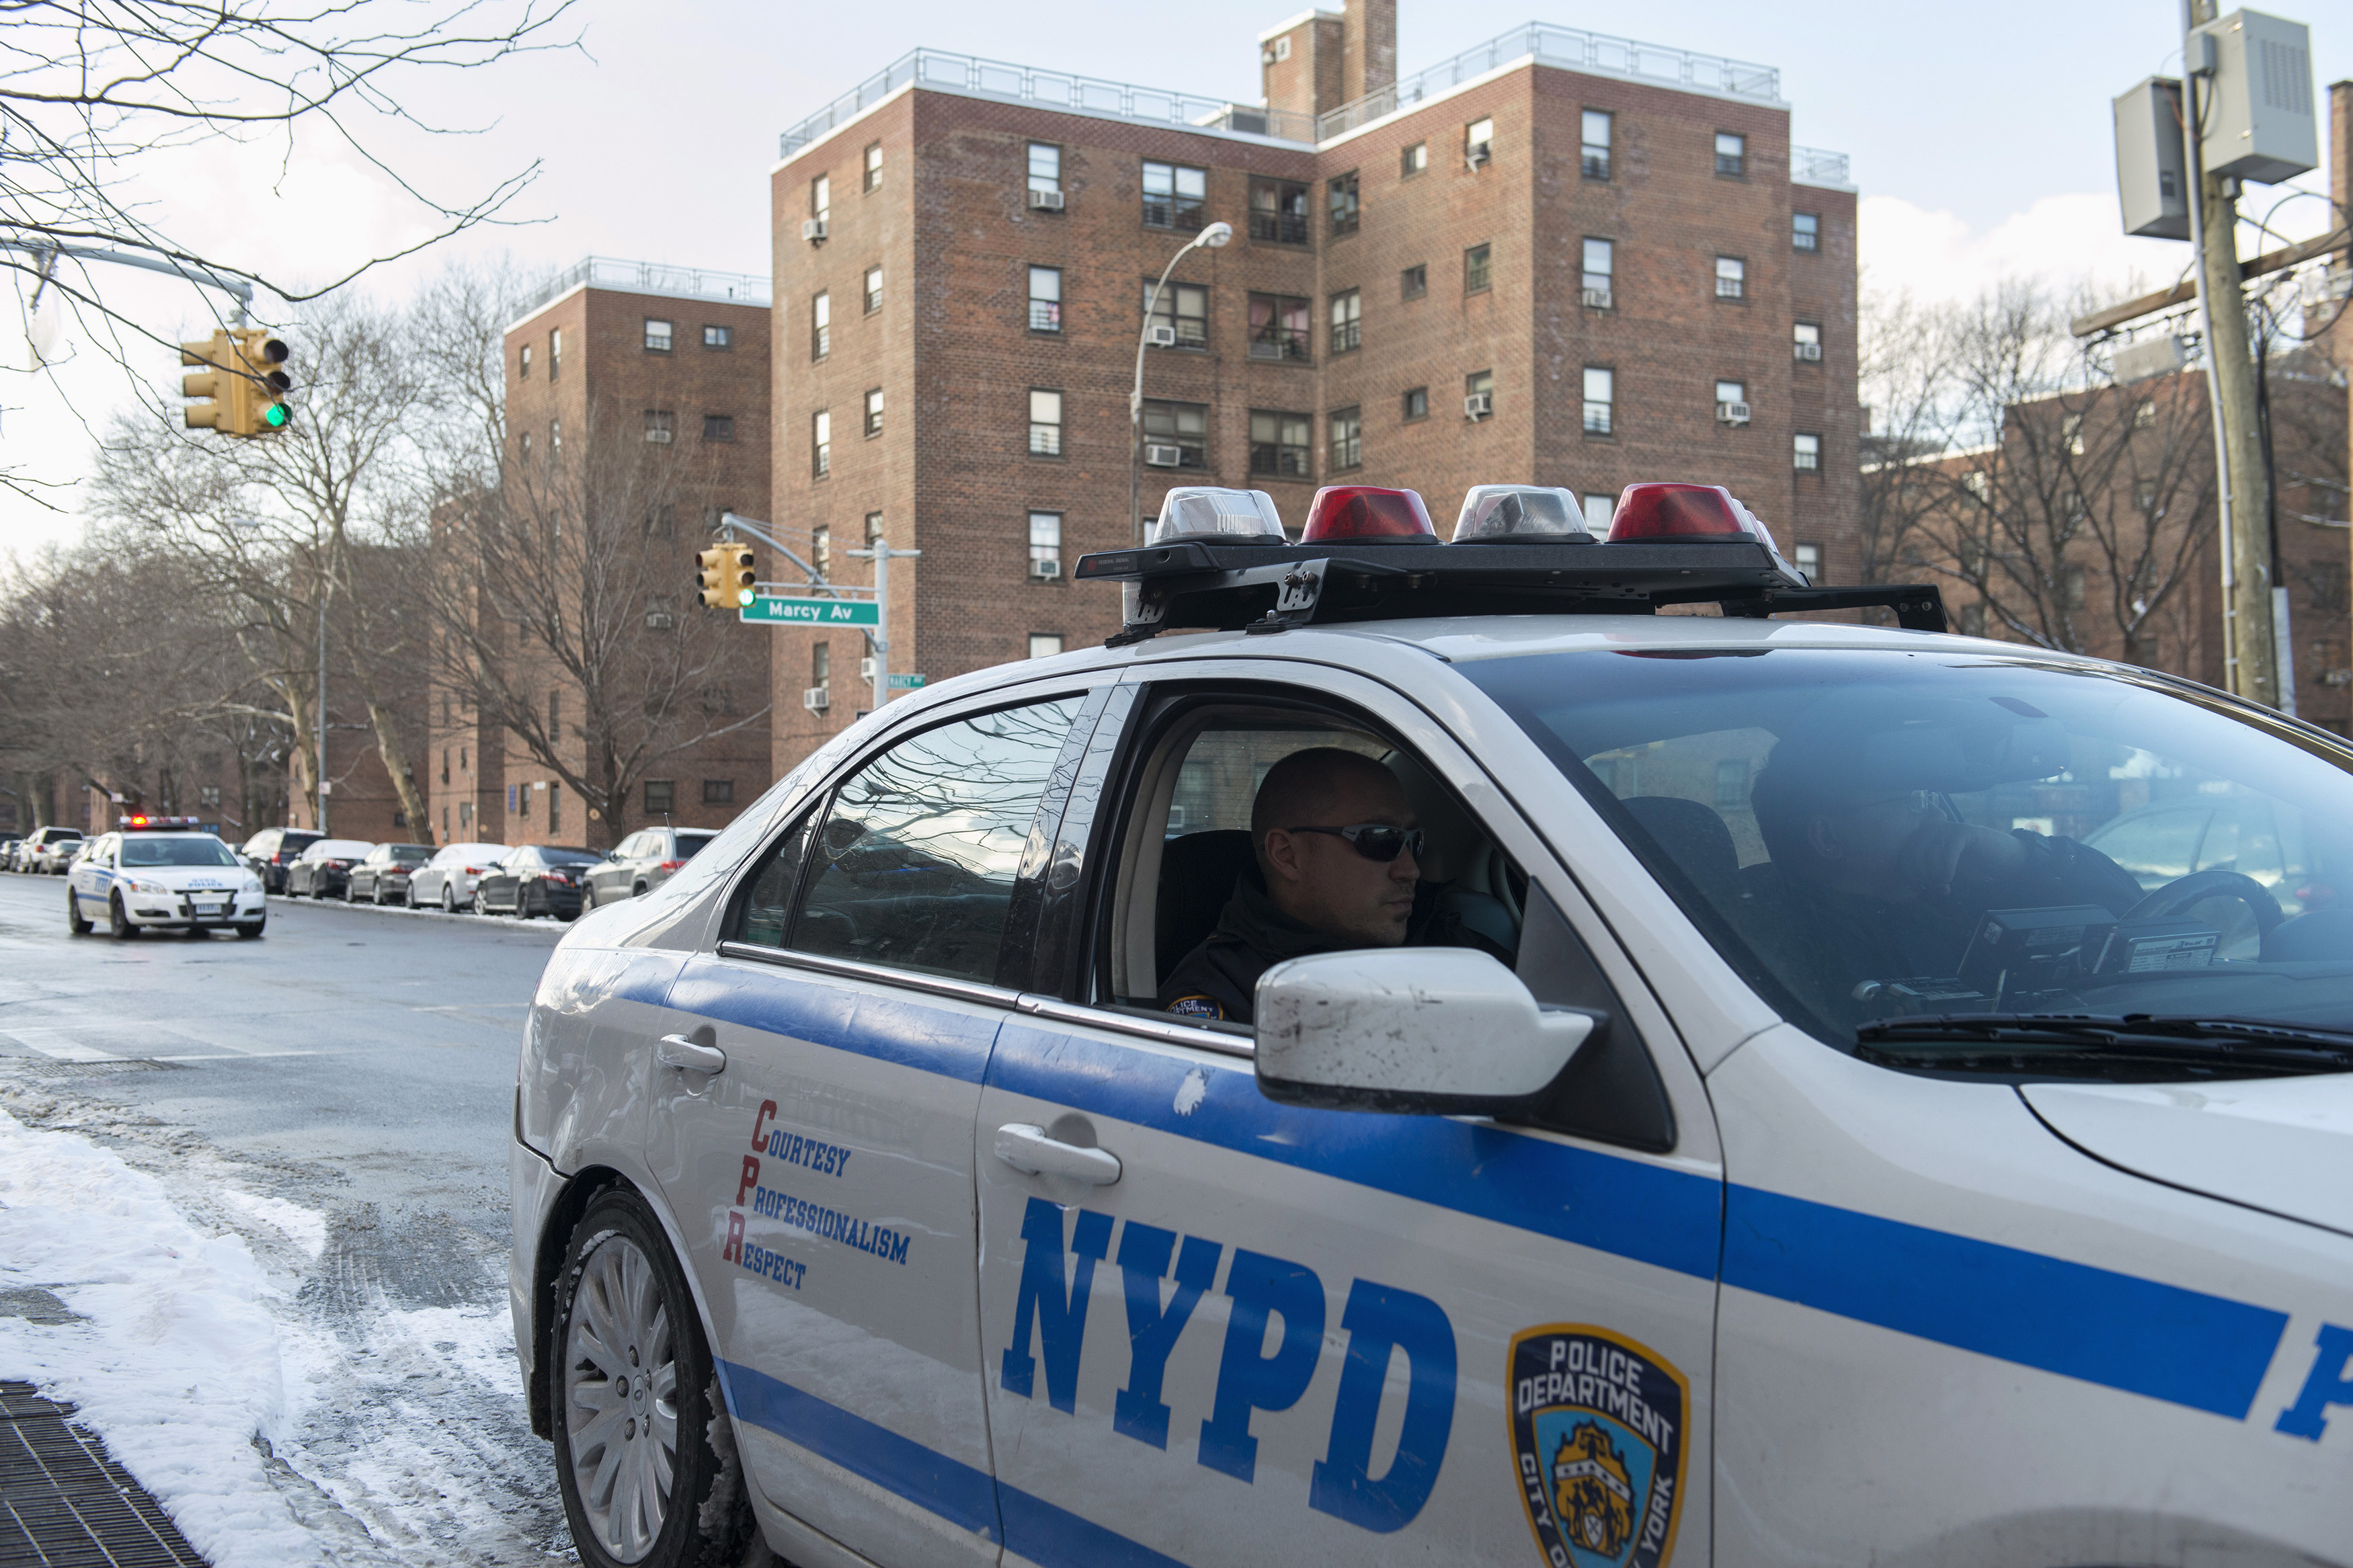 A NYPD patrol vehicle is seen near the Marcy Houses public housing development in the Brooklyn borough of New York